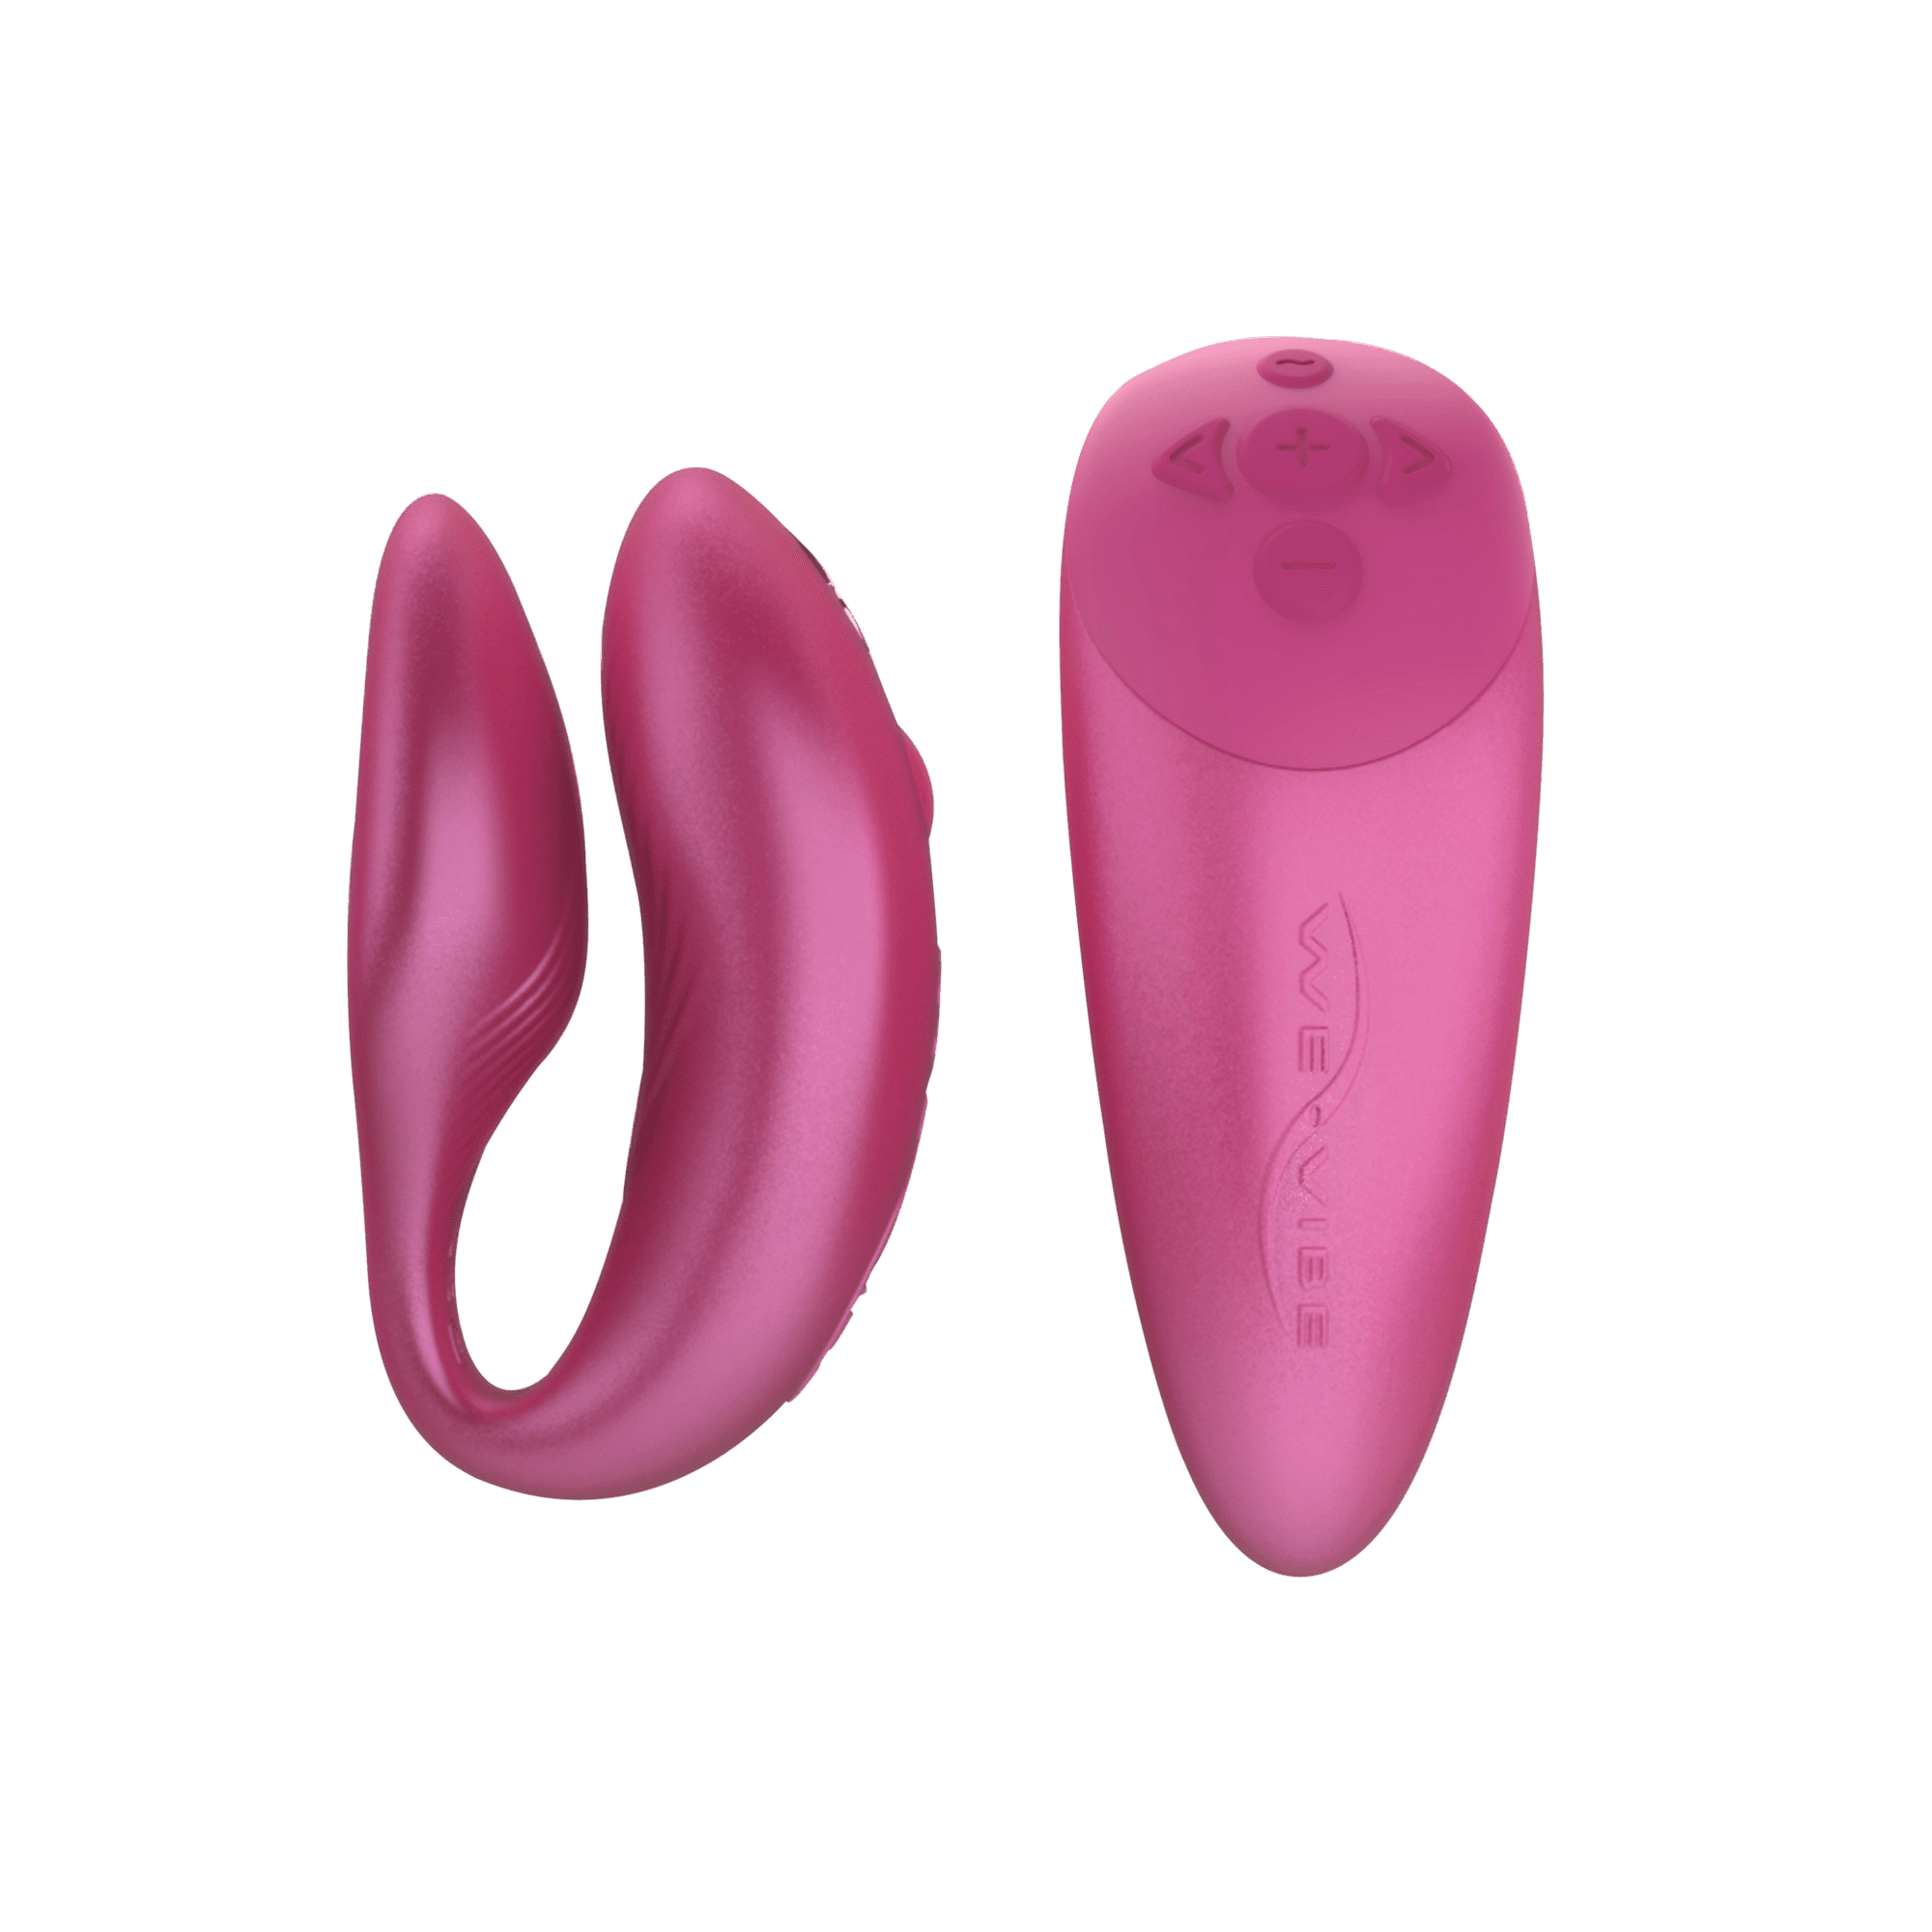 Vibrator with Remote and App, Cosmic Pink Walmart.com